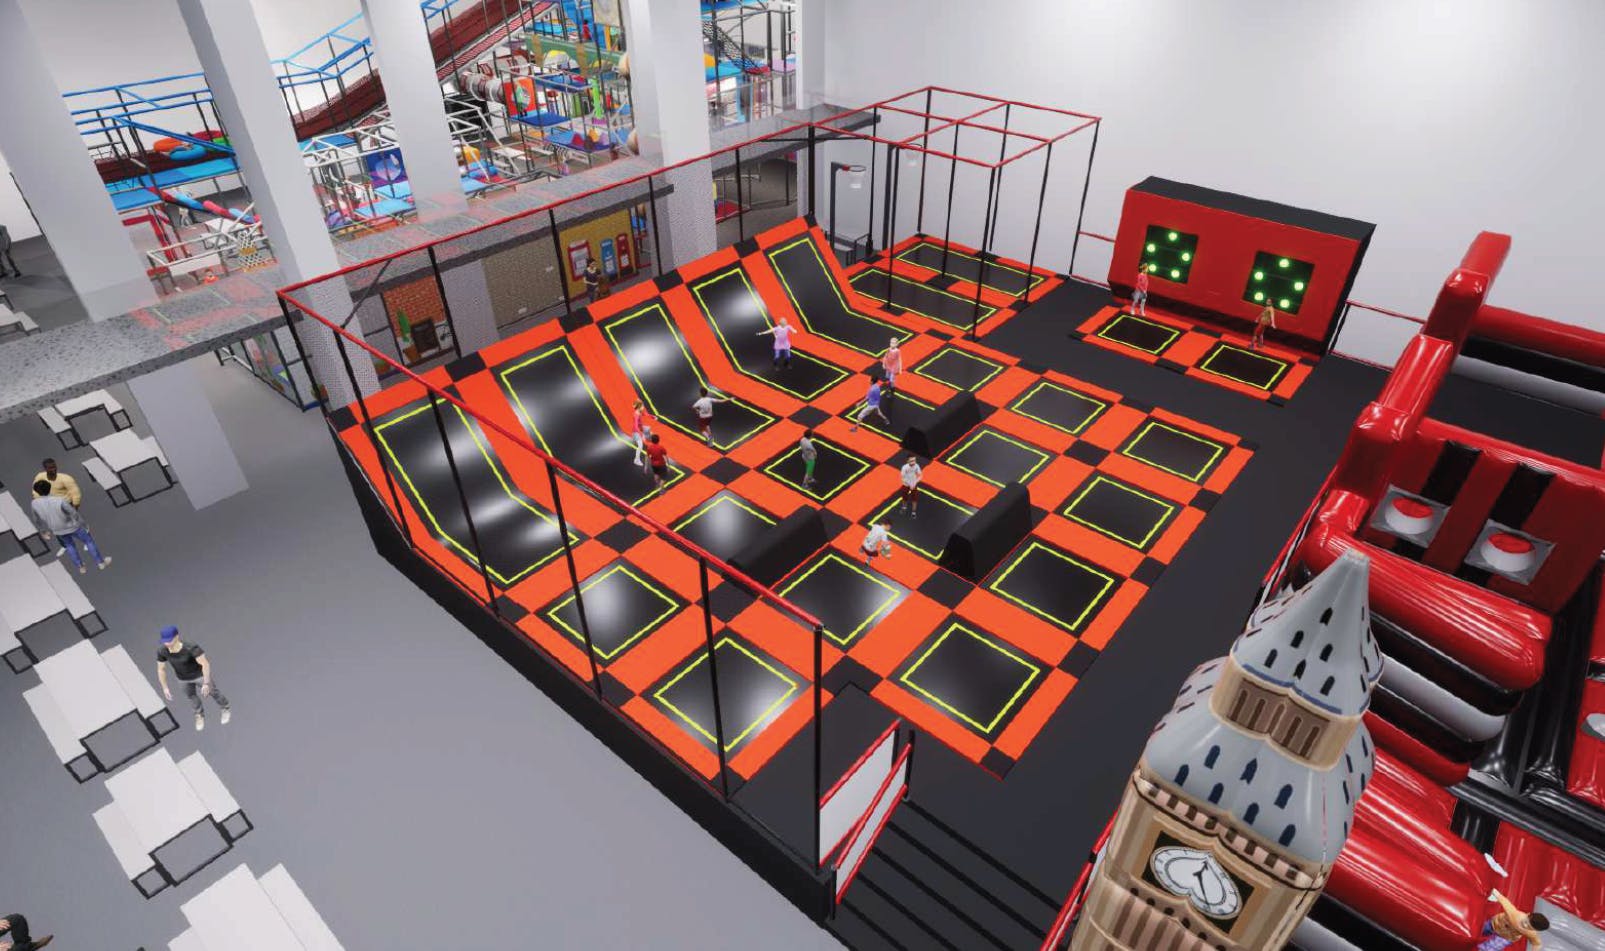 Digital representation showing the proposed trampoline area